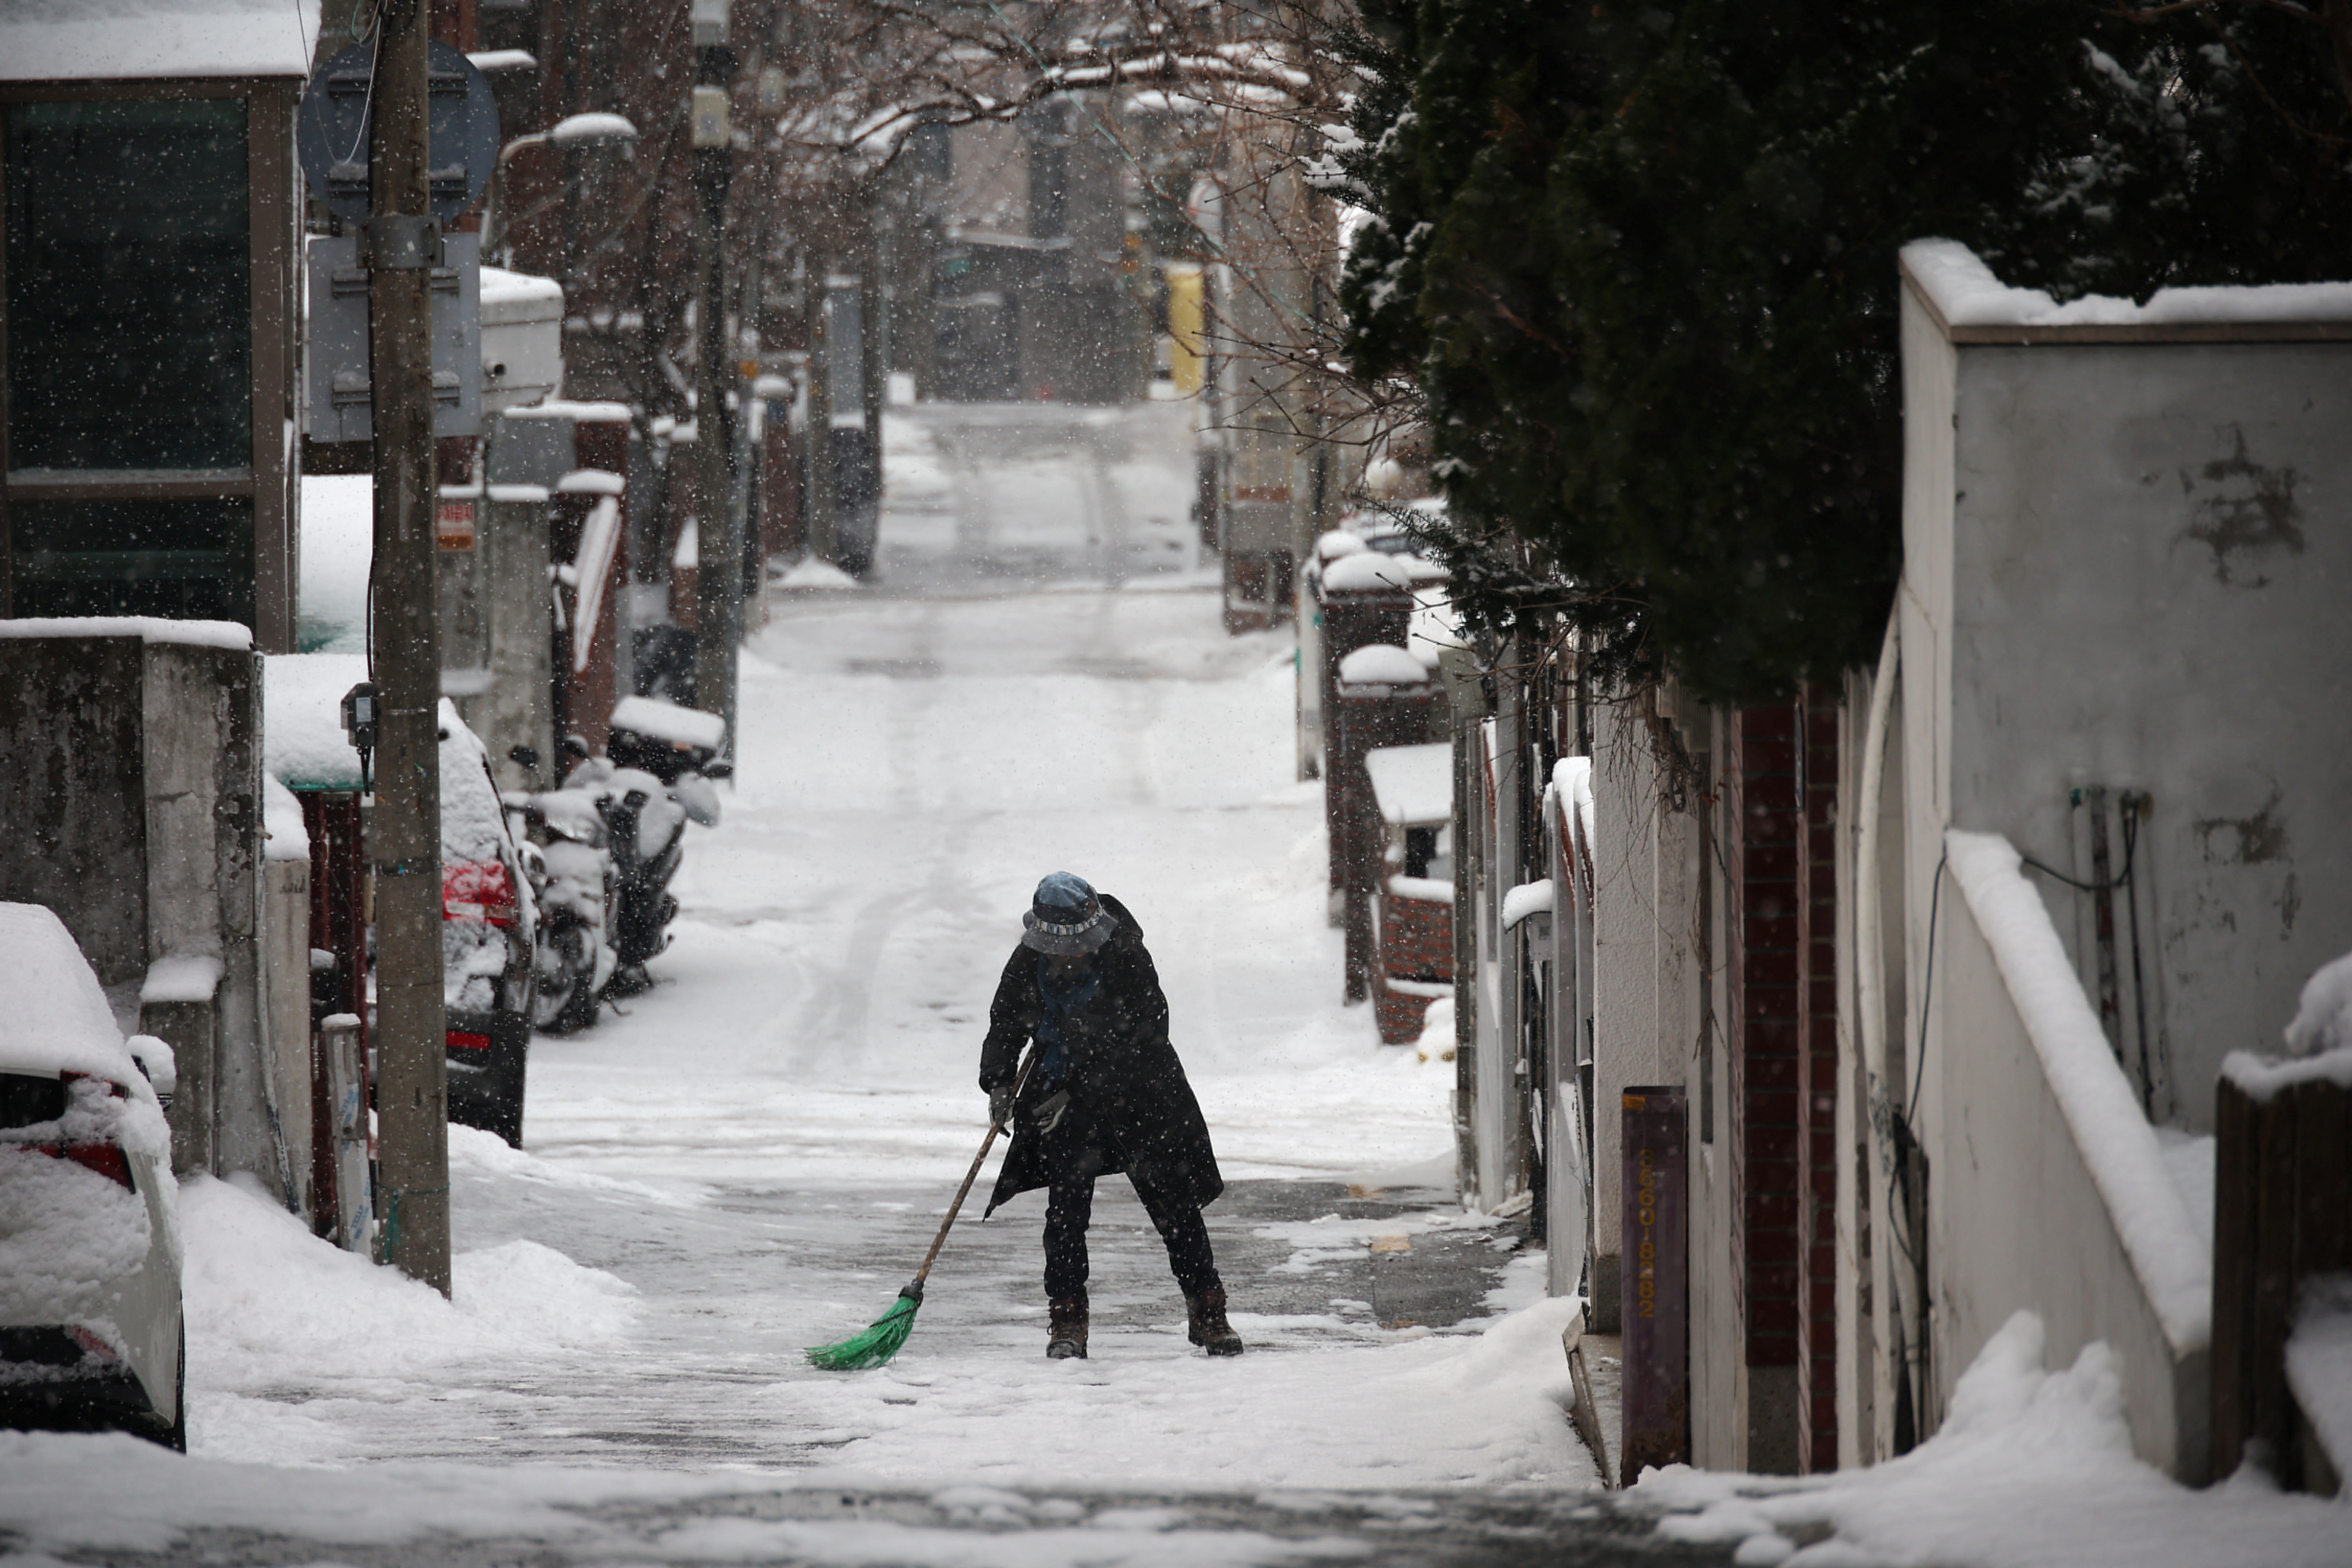 South Korean residents worry over higher heating bills and severe cold snap